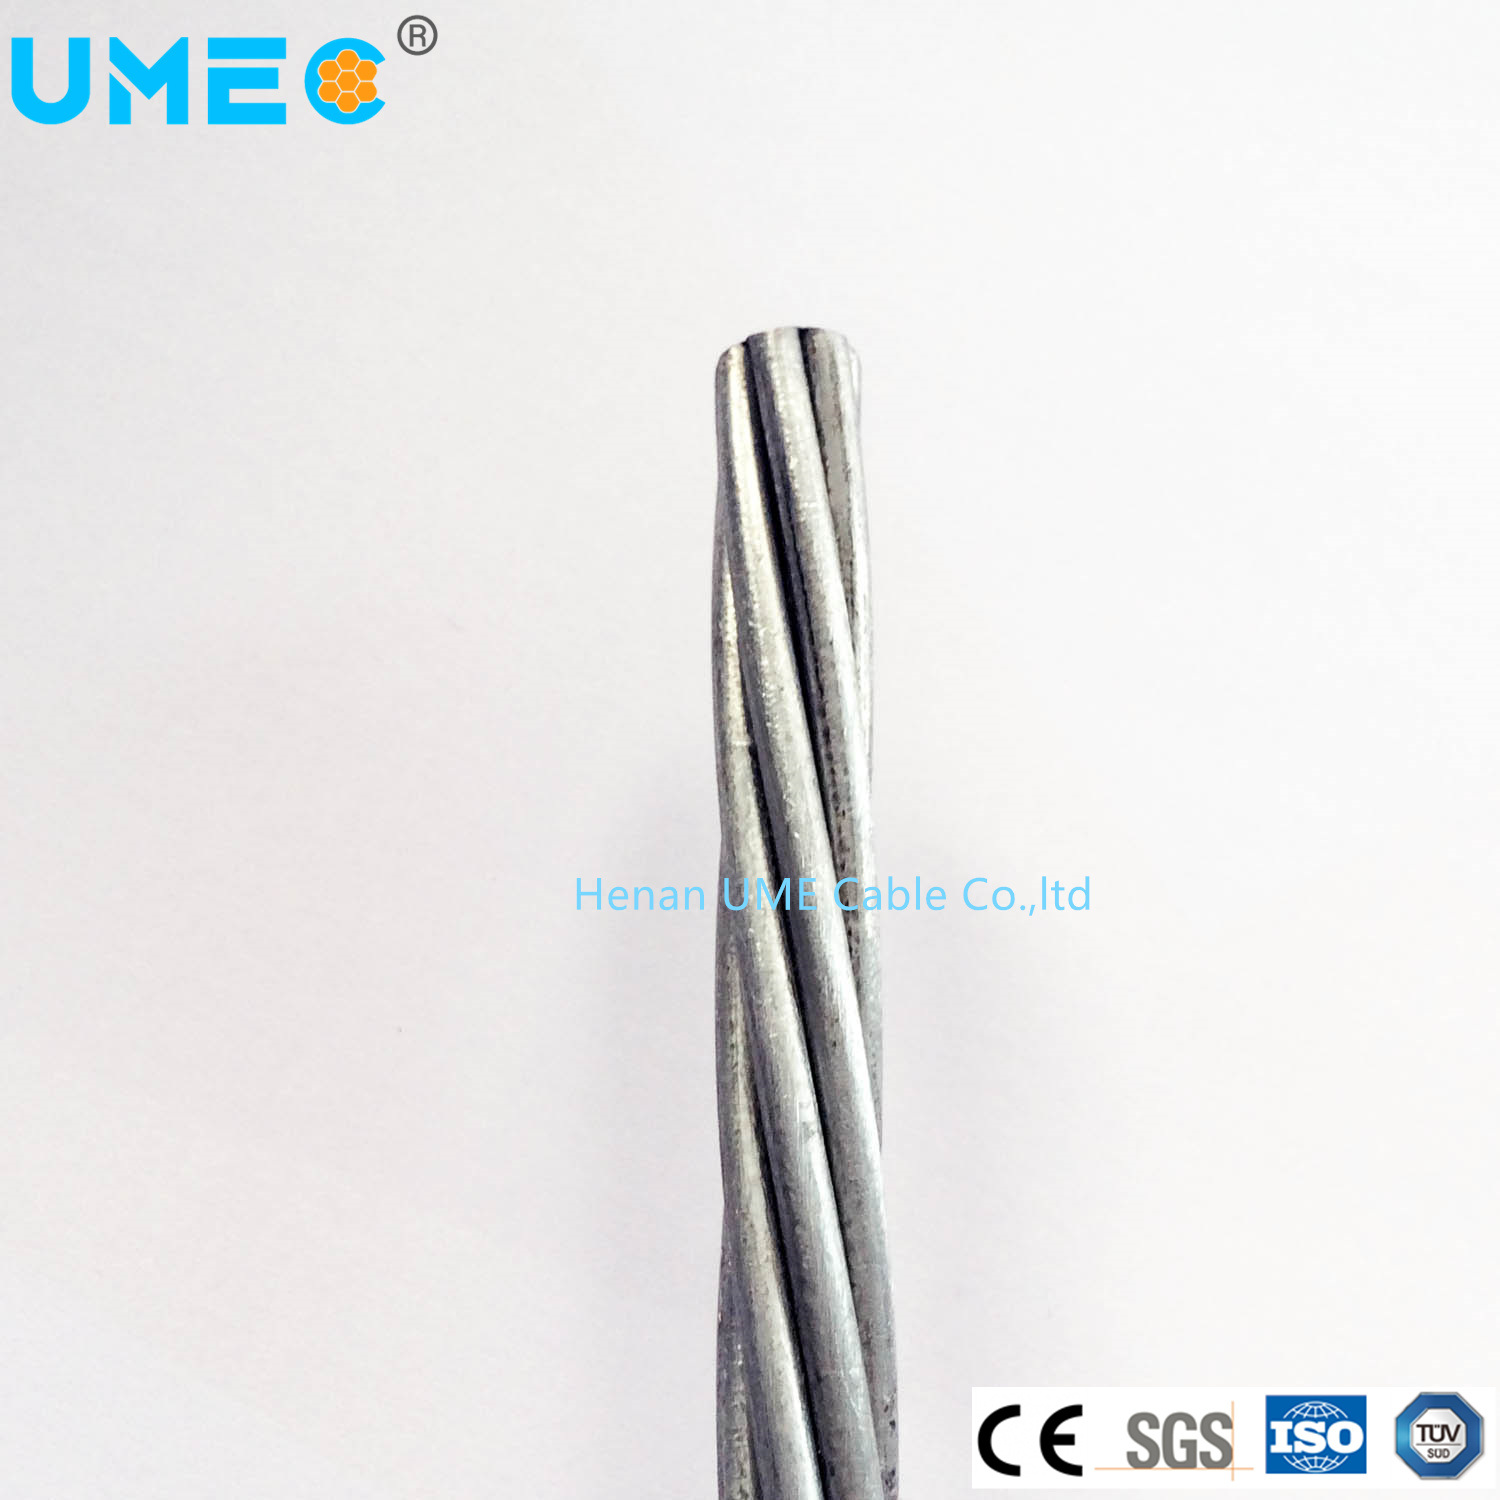 Electrical Gsw Cable Manufacturer Hot Selling High Tensile Strength Spring Galvanized Steel Wire 7/3.05mm Electrical Cable